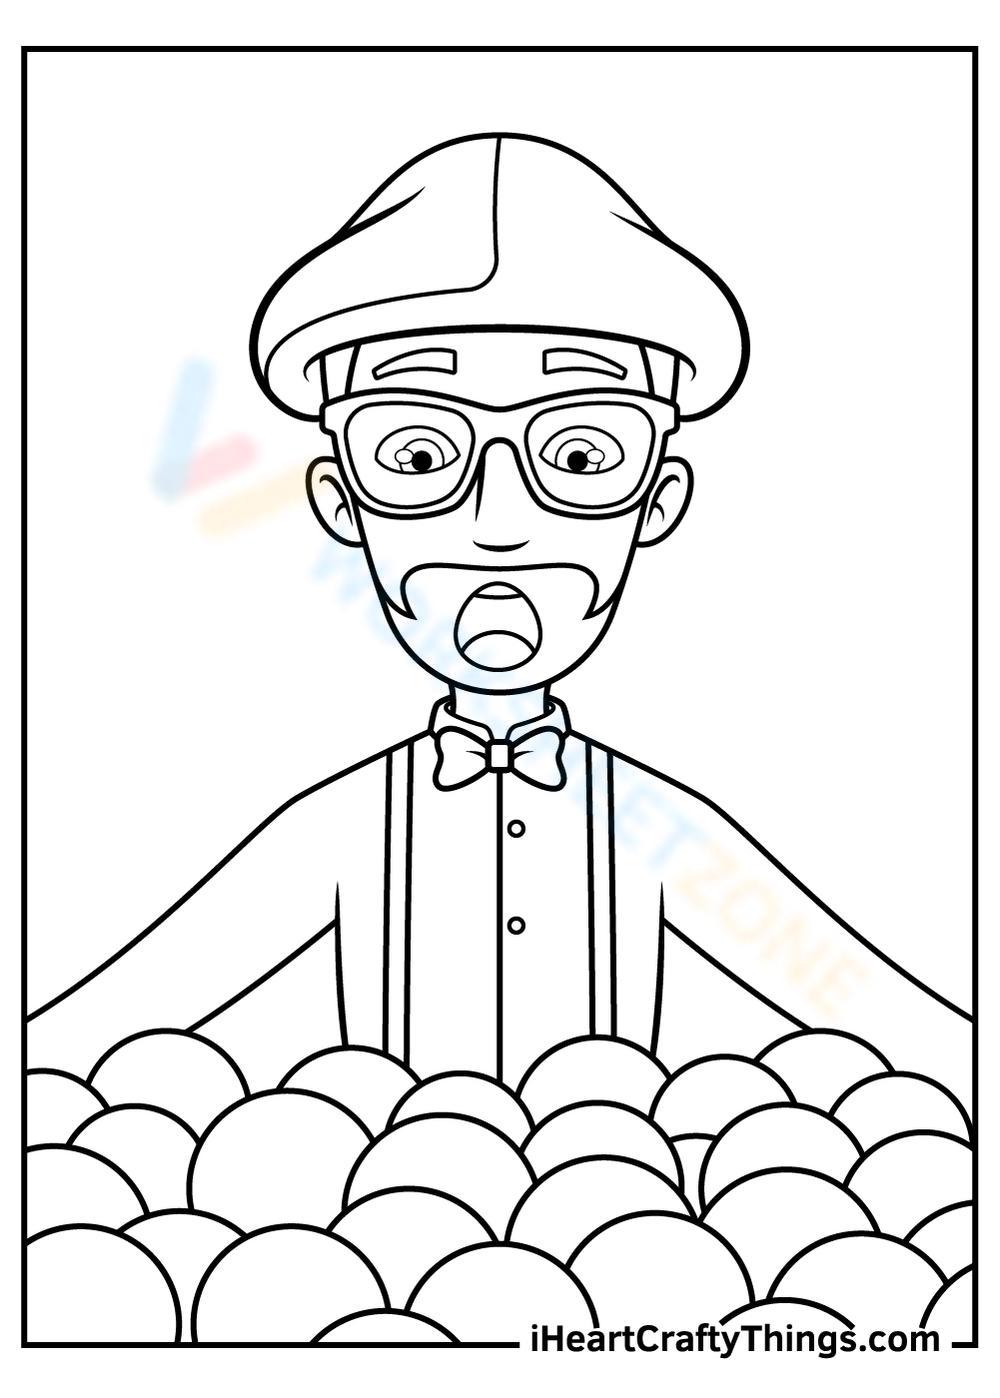 Free collection of attractive blippi coloring pages for kids